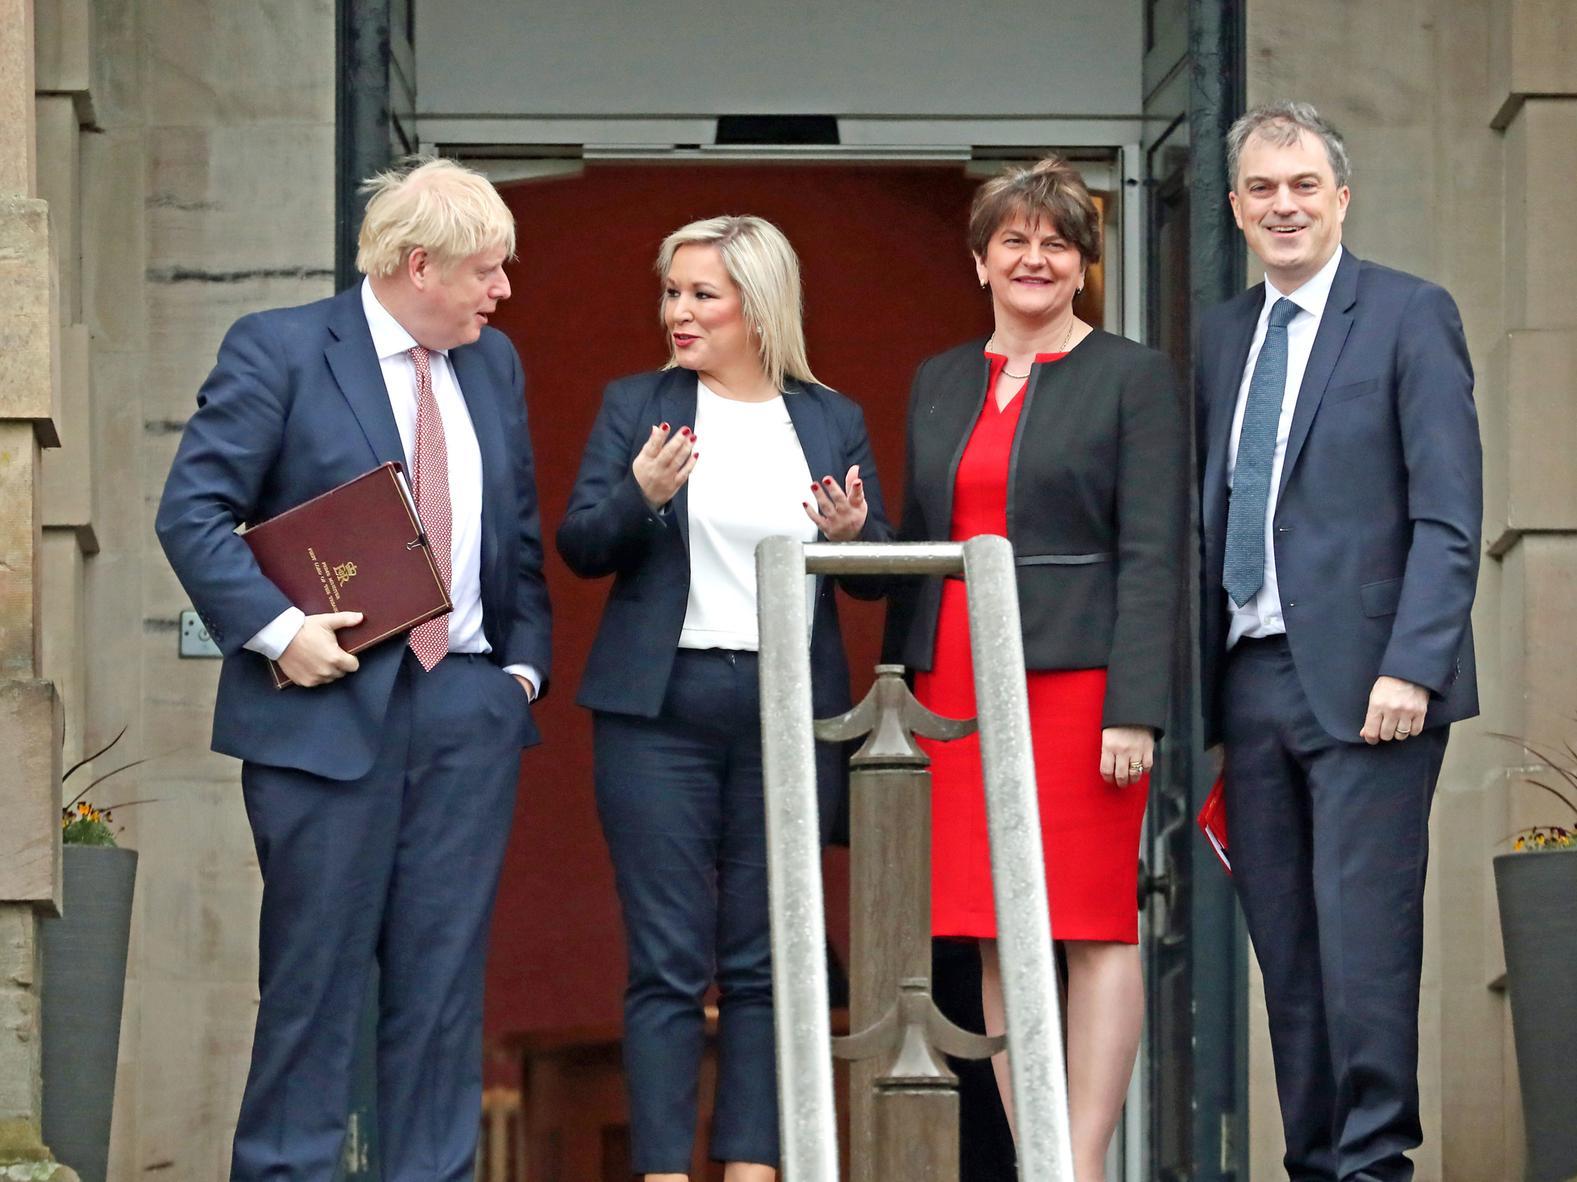 Prime Minister Boris Johnson and Secretary of State for Northern Ireland, Julian Smith, First Minister, Arlene Foster and deputy First Minister Michelle O'Neill